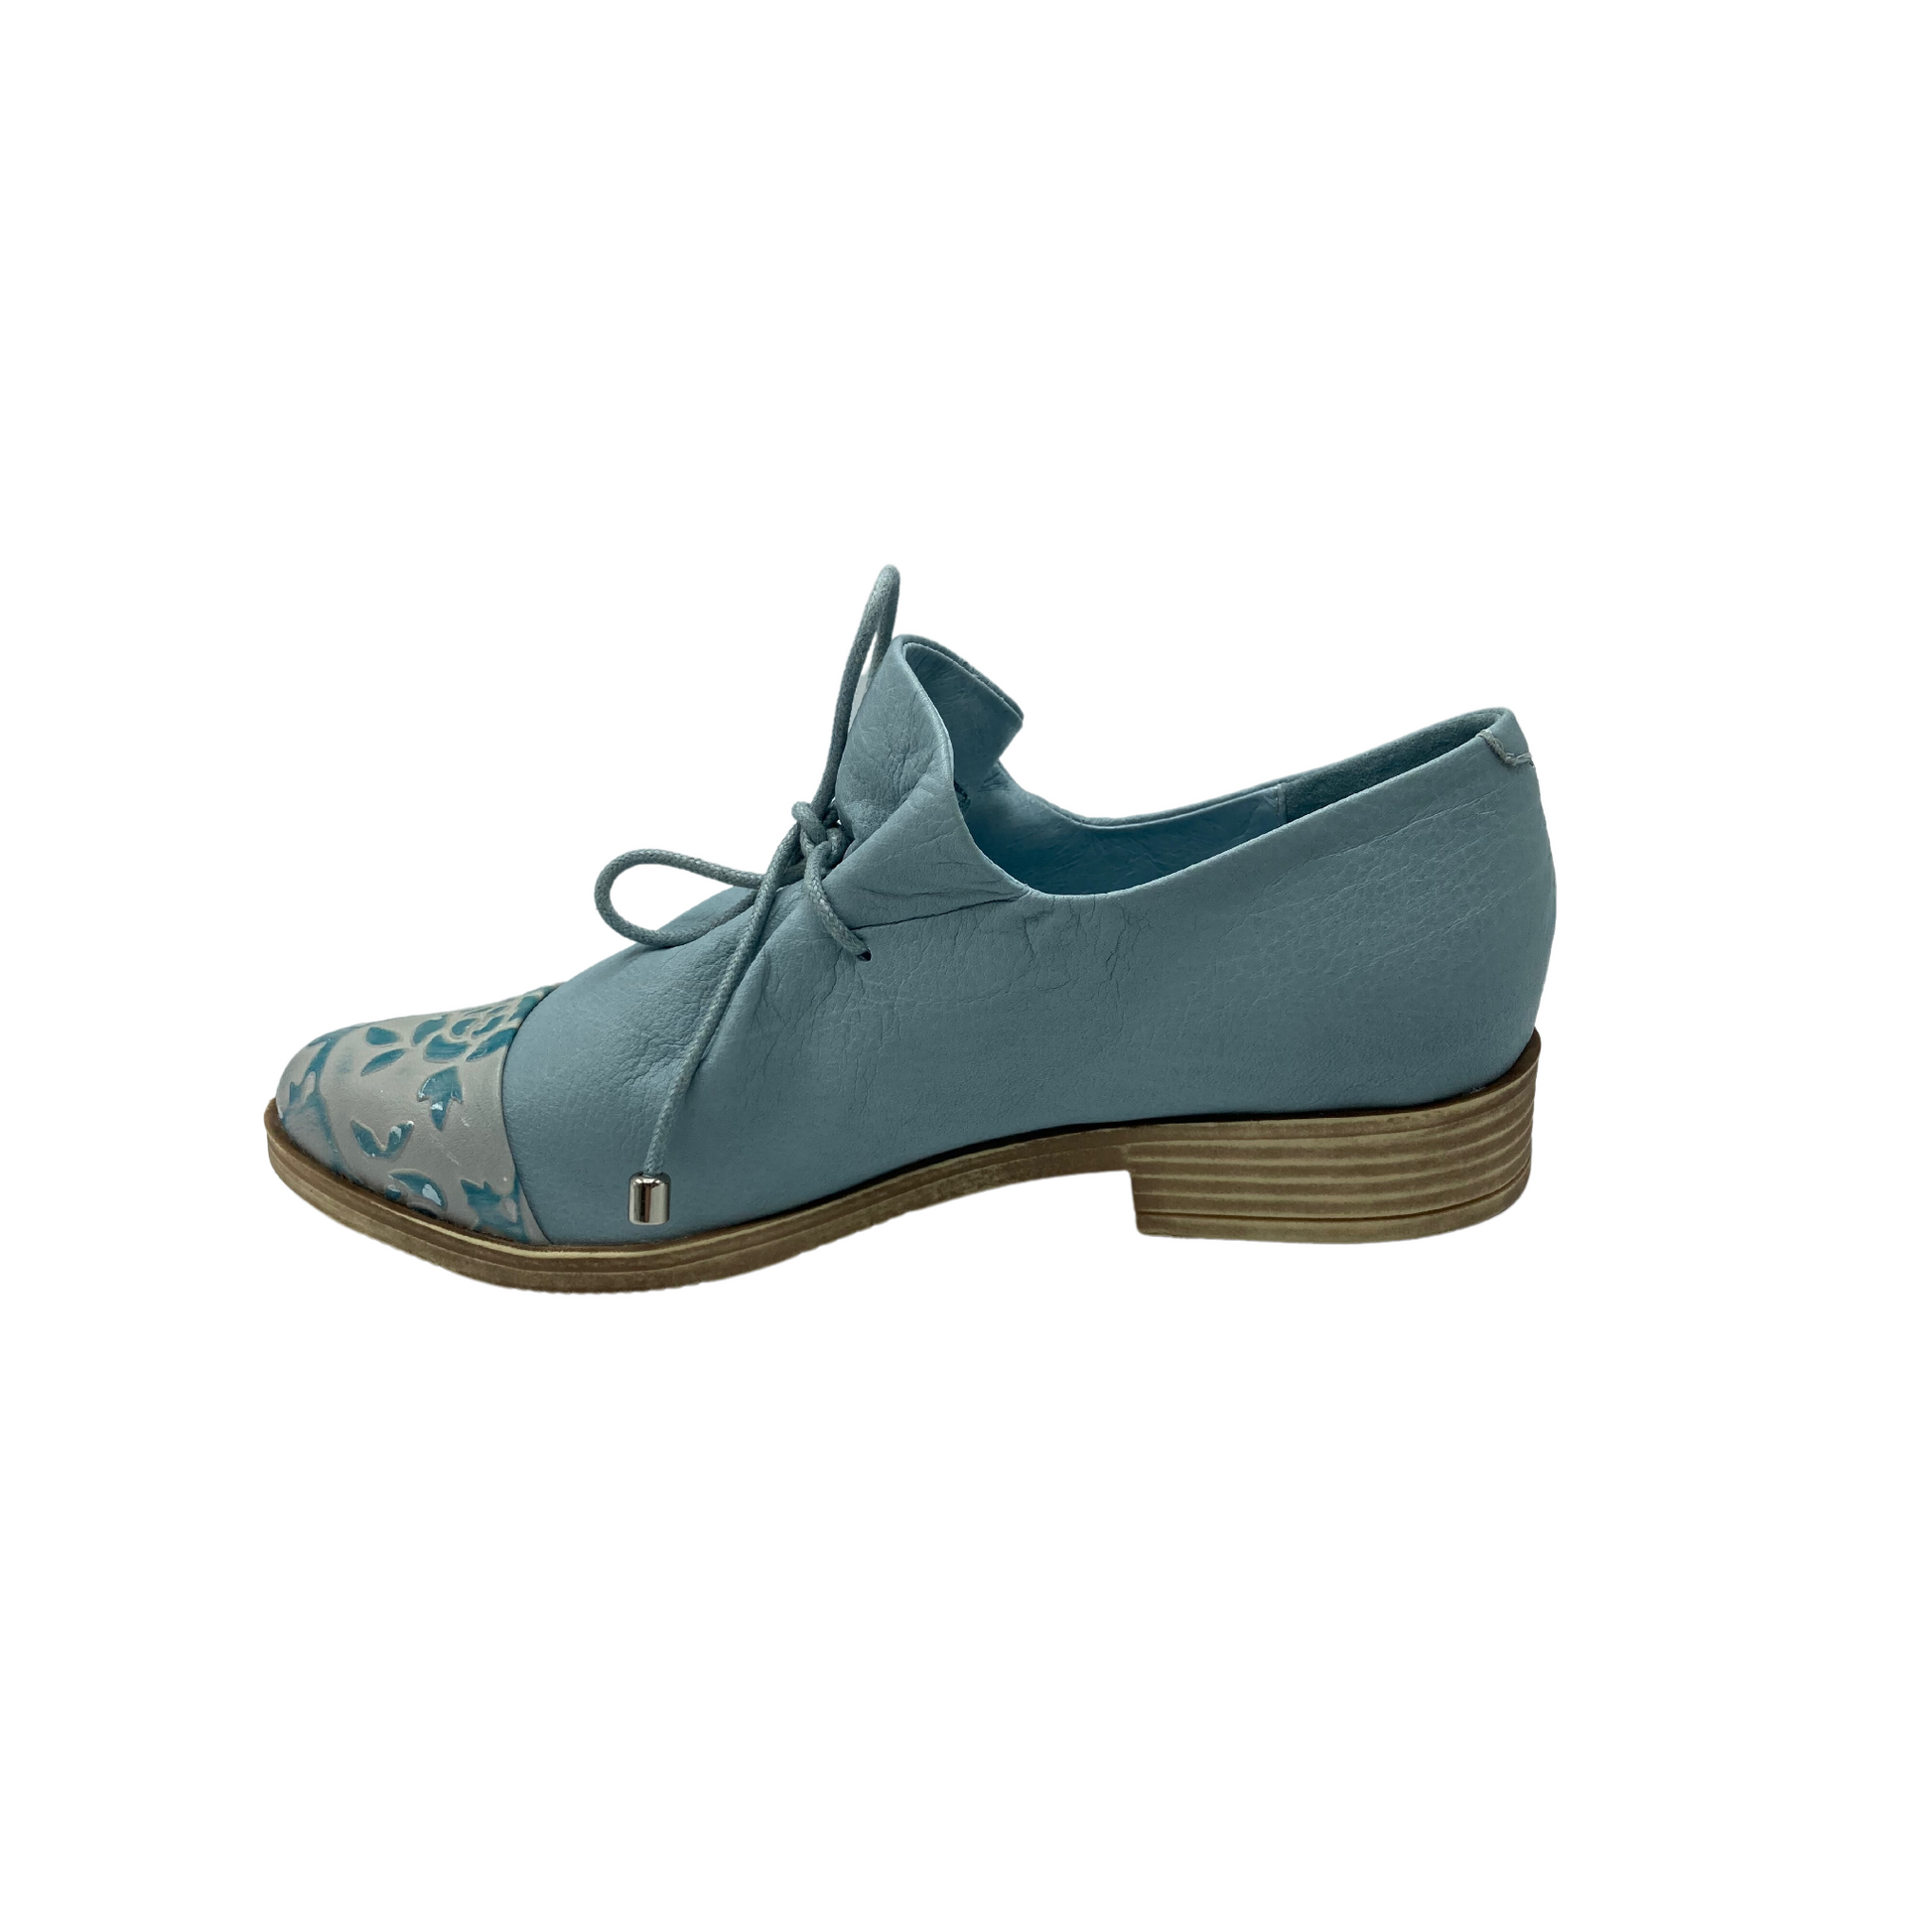 Inside view of the Kotty in denim blue with stacked low square heel